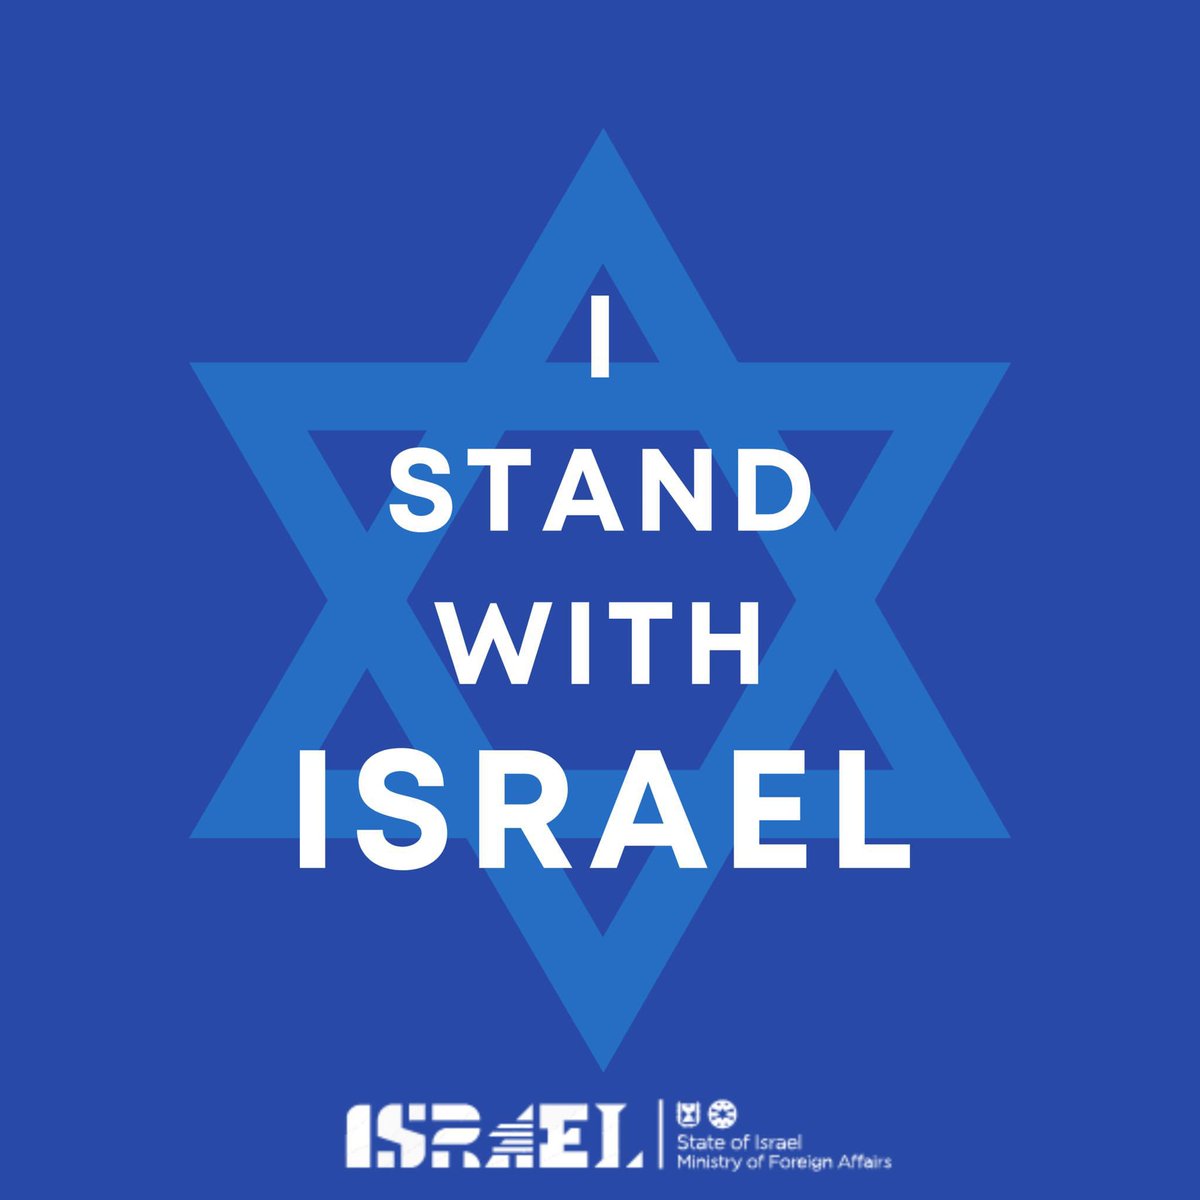 Take a stand with Israel - stand on the right side of history!